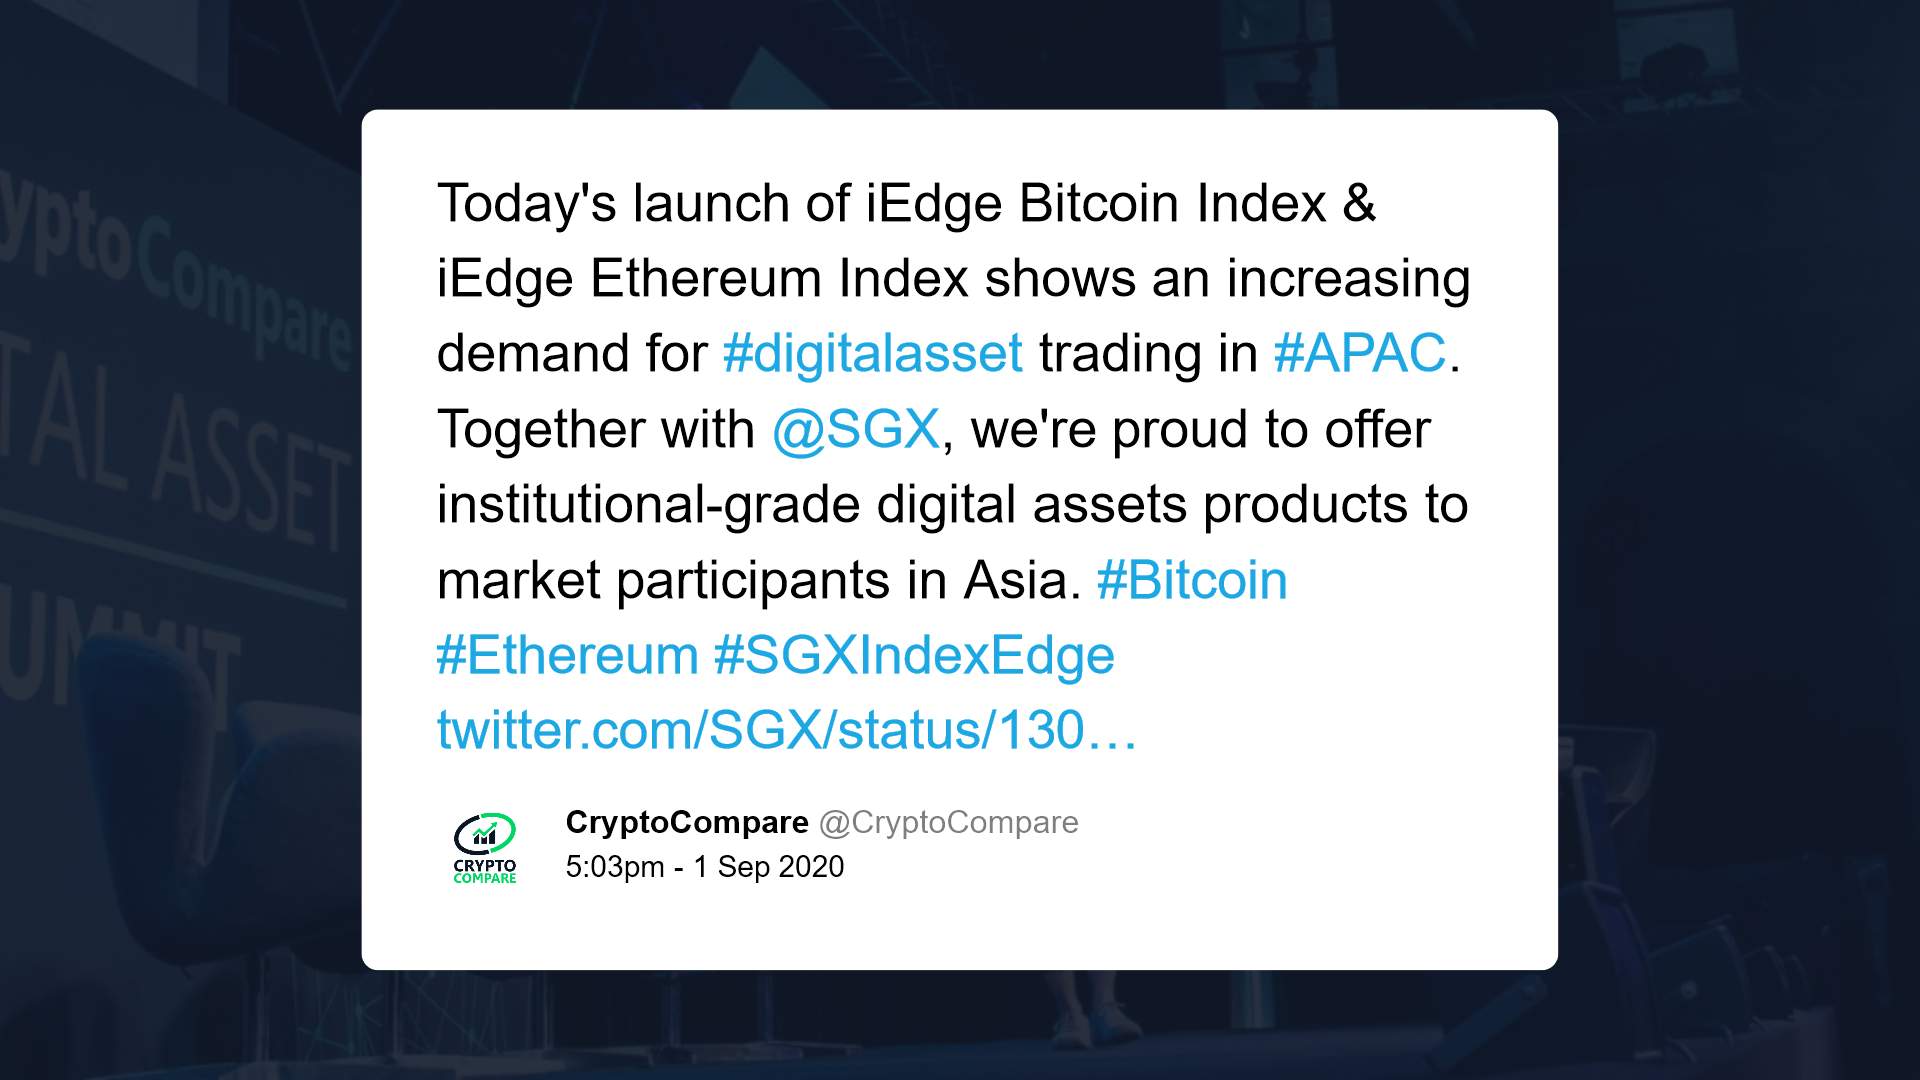 SGX in conjunction with CryptoCompare offering Asia-listed cryptocurrency indices